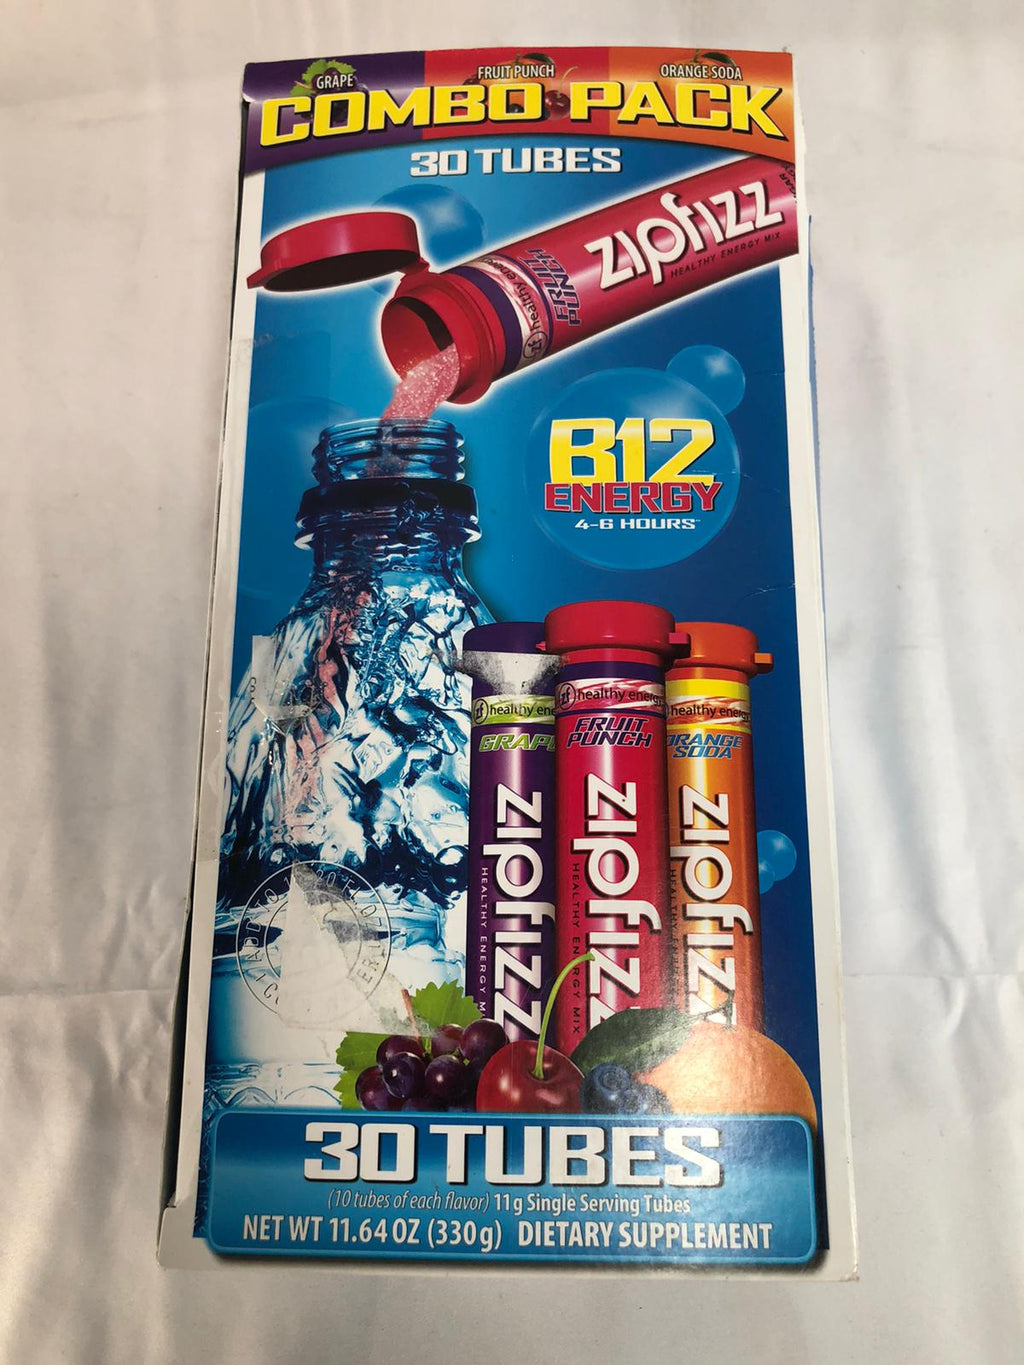 Zipfizz Energy Drink Mix, Variety Pack, 30 Tubes